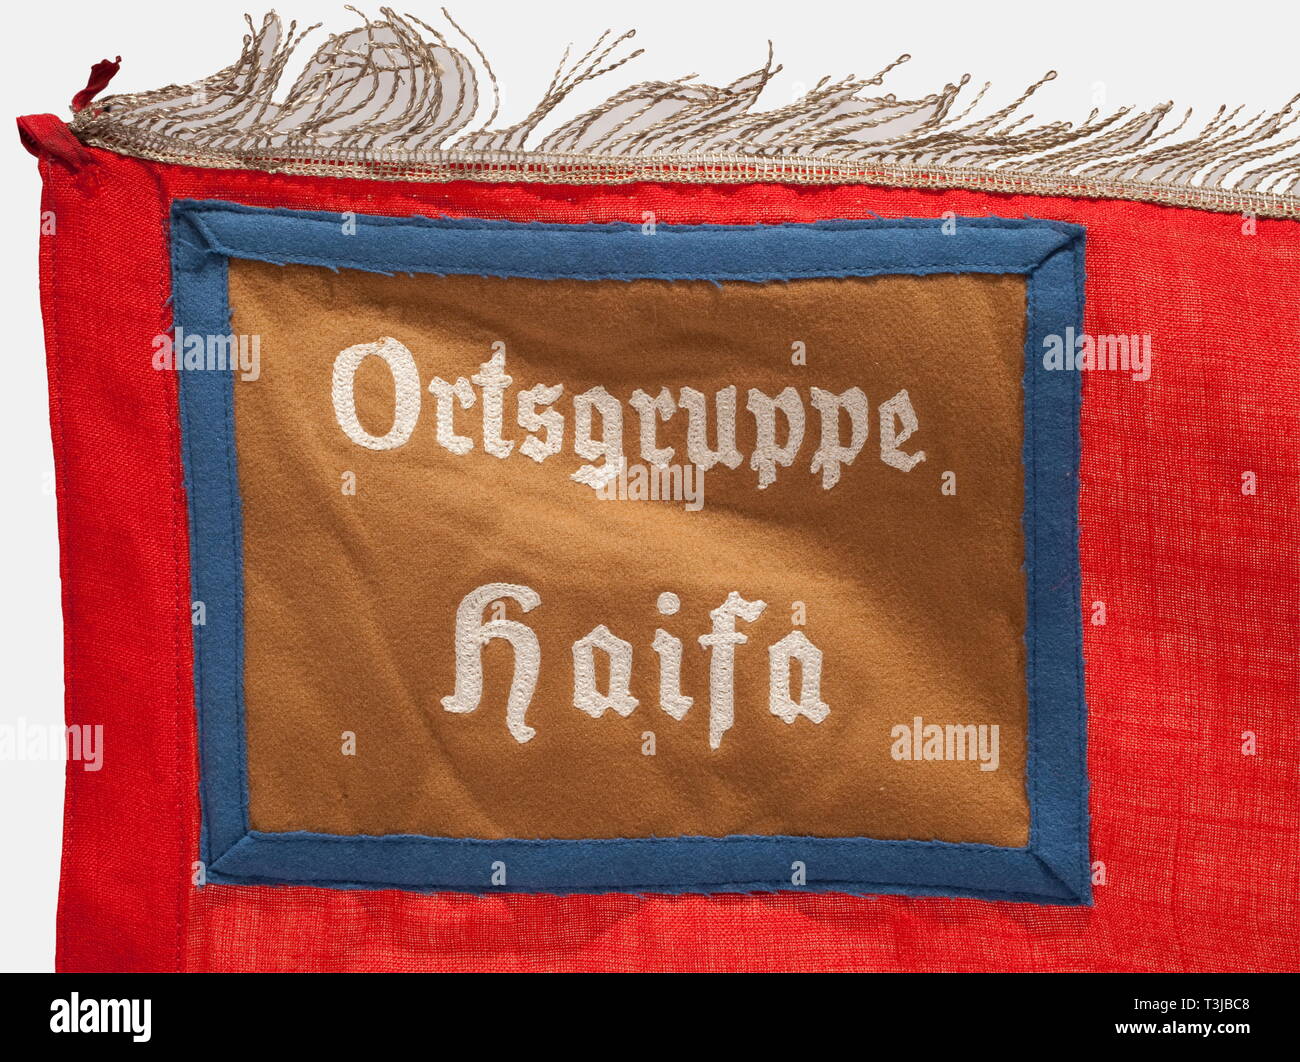 A banner for the Haifa local group, NSDAP Foreign Organization, Palestine National Group Red naval banner cloth with a white disc in the centre on both sides displaying an upright black swastika, a brown panel with blue border trim in the upper hoist corner bearing the white embroidered unit designation, 'Orstgruppe Haifa', silver fringe on three sides, and six nickel-plated flagpole rings, the top one missing. Small holes, generally in very good condition. Dimensions 125 x 135 cm. The NSDAP Haifa local group was part of the Palestine National Group of the NSDAP, whose memb, Editorial-Use-Only Stock Photo